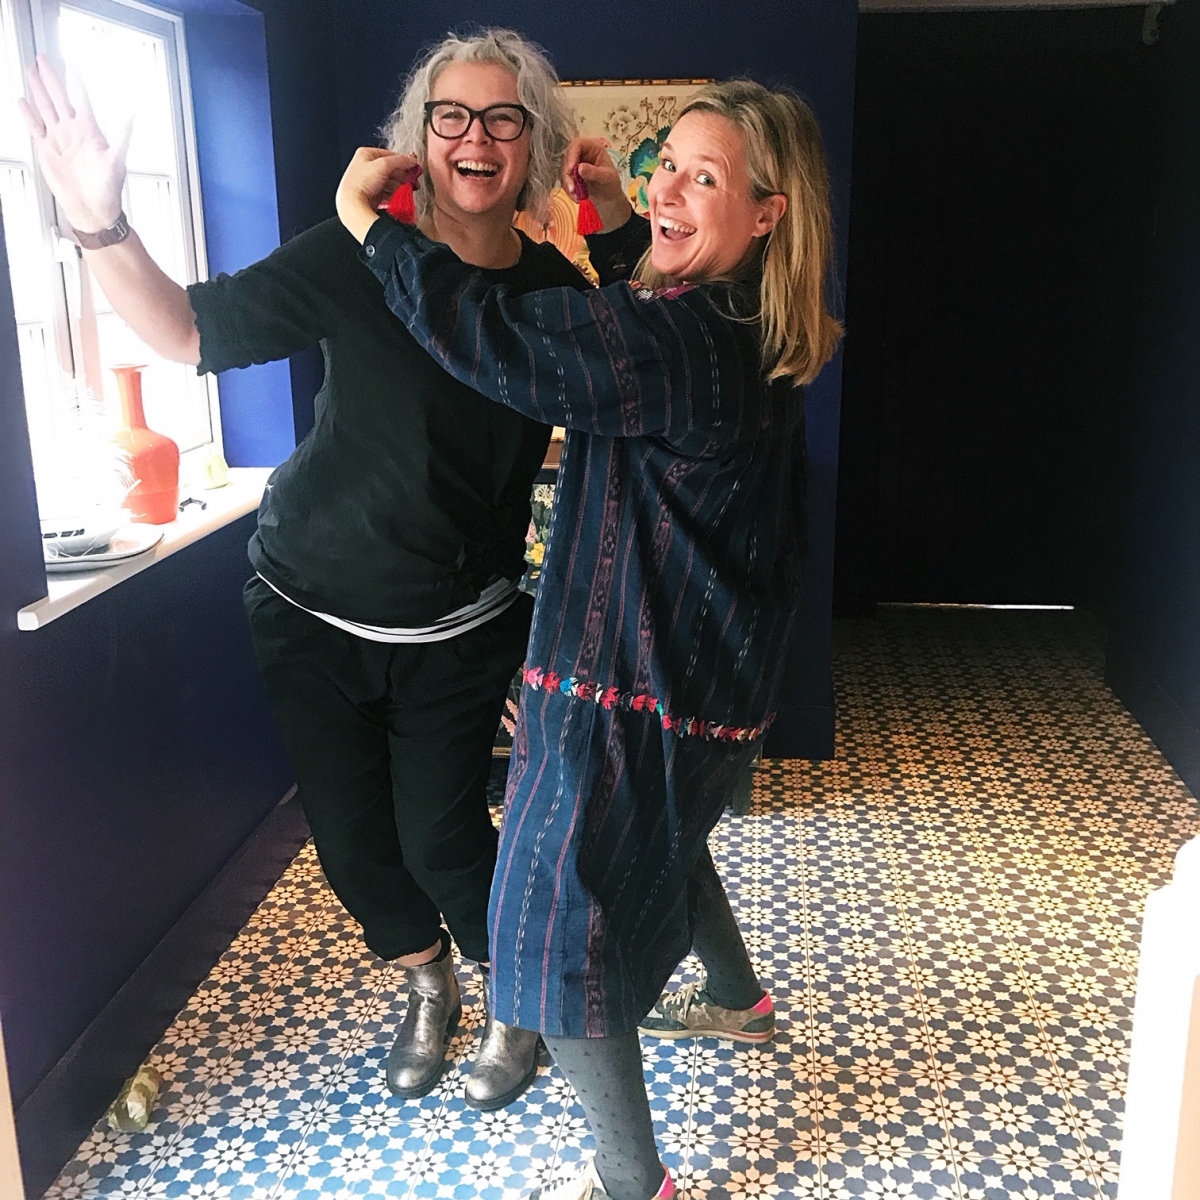 Interior designer Sophie Robinson and kate Watson-Smyth give interiors advice on The Great Indoors Podcast